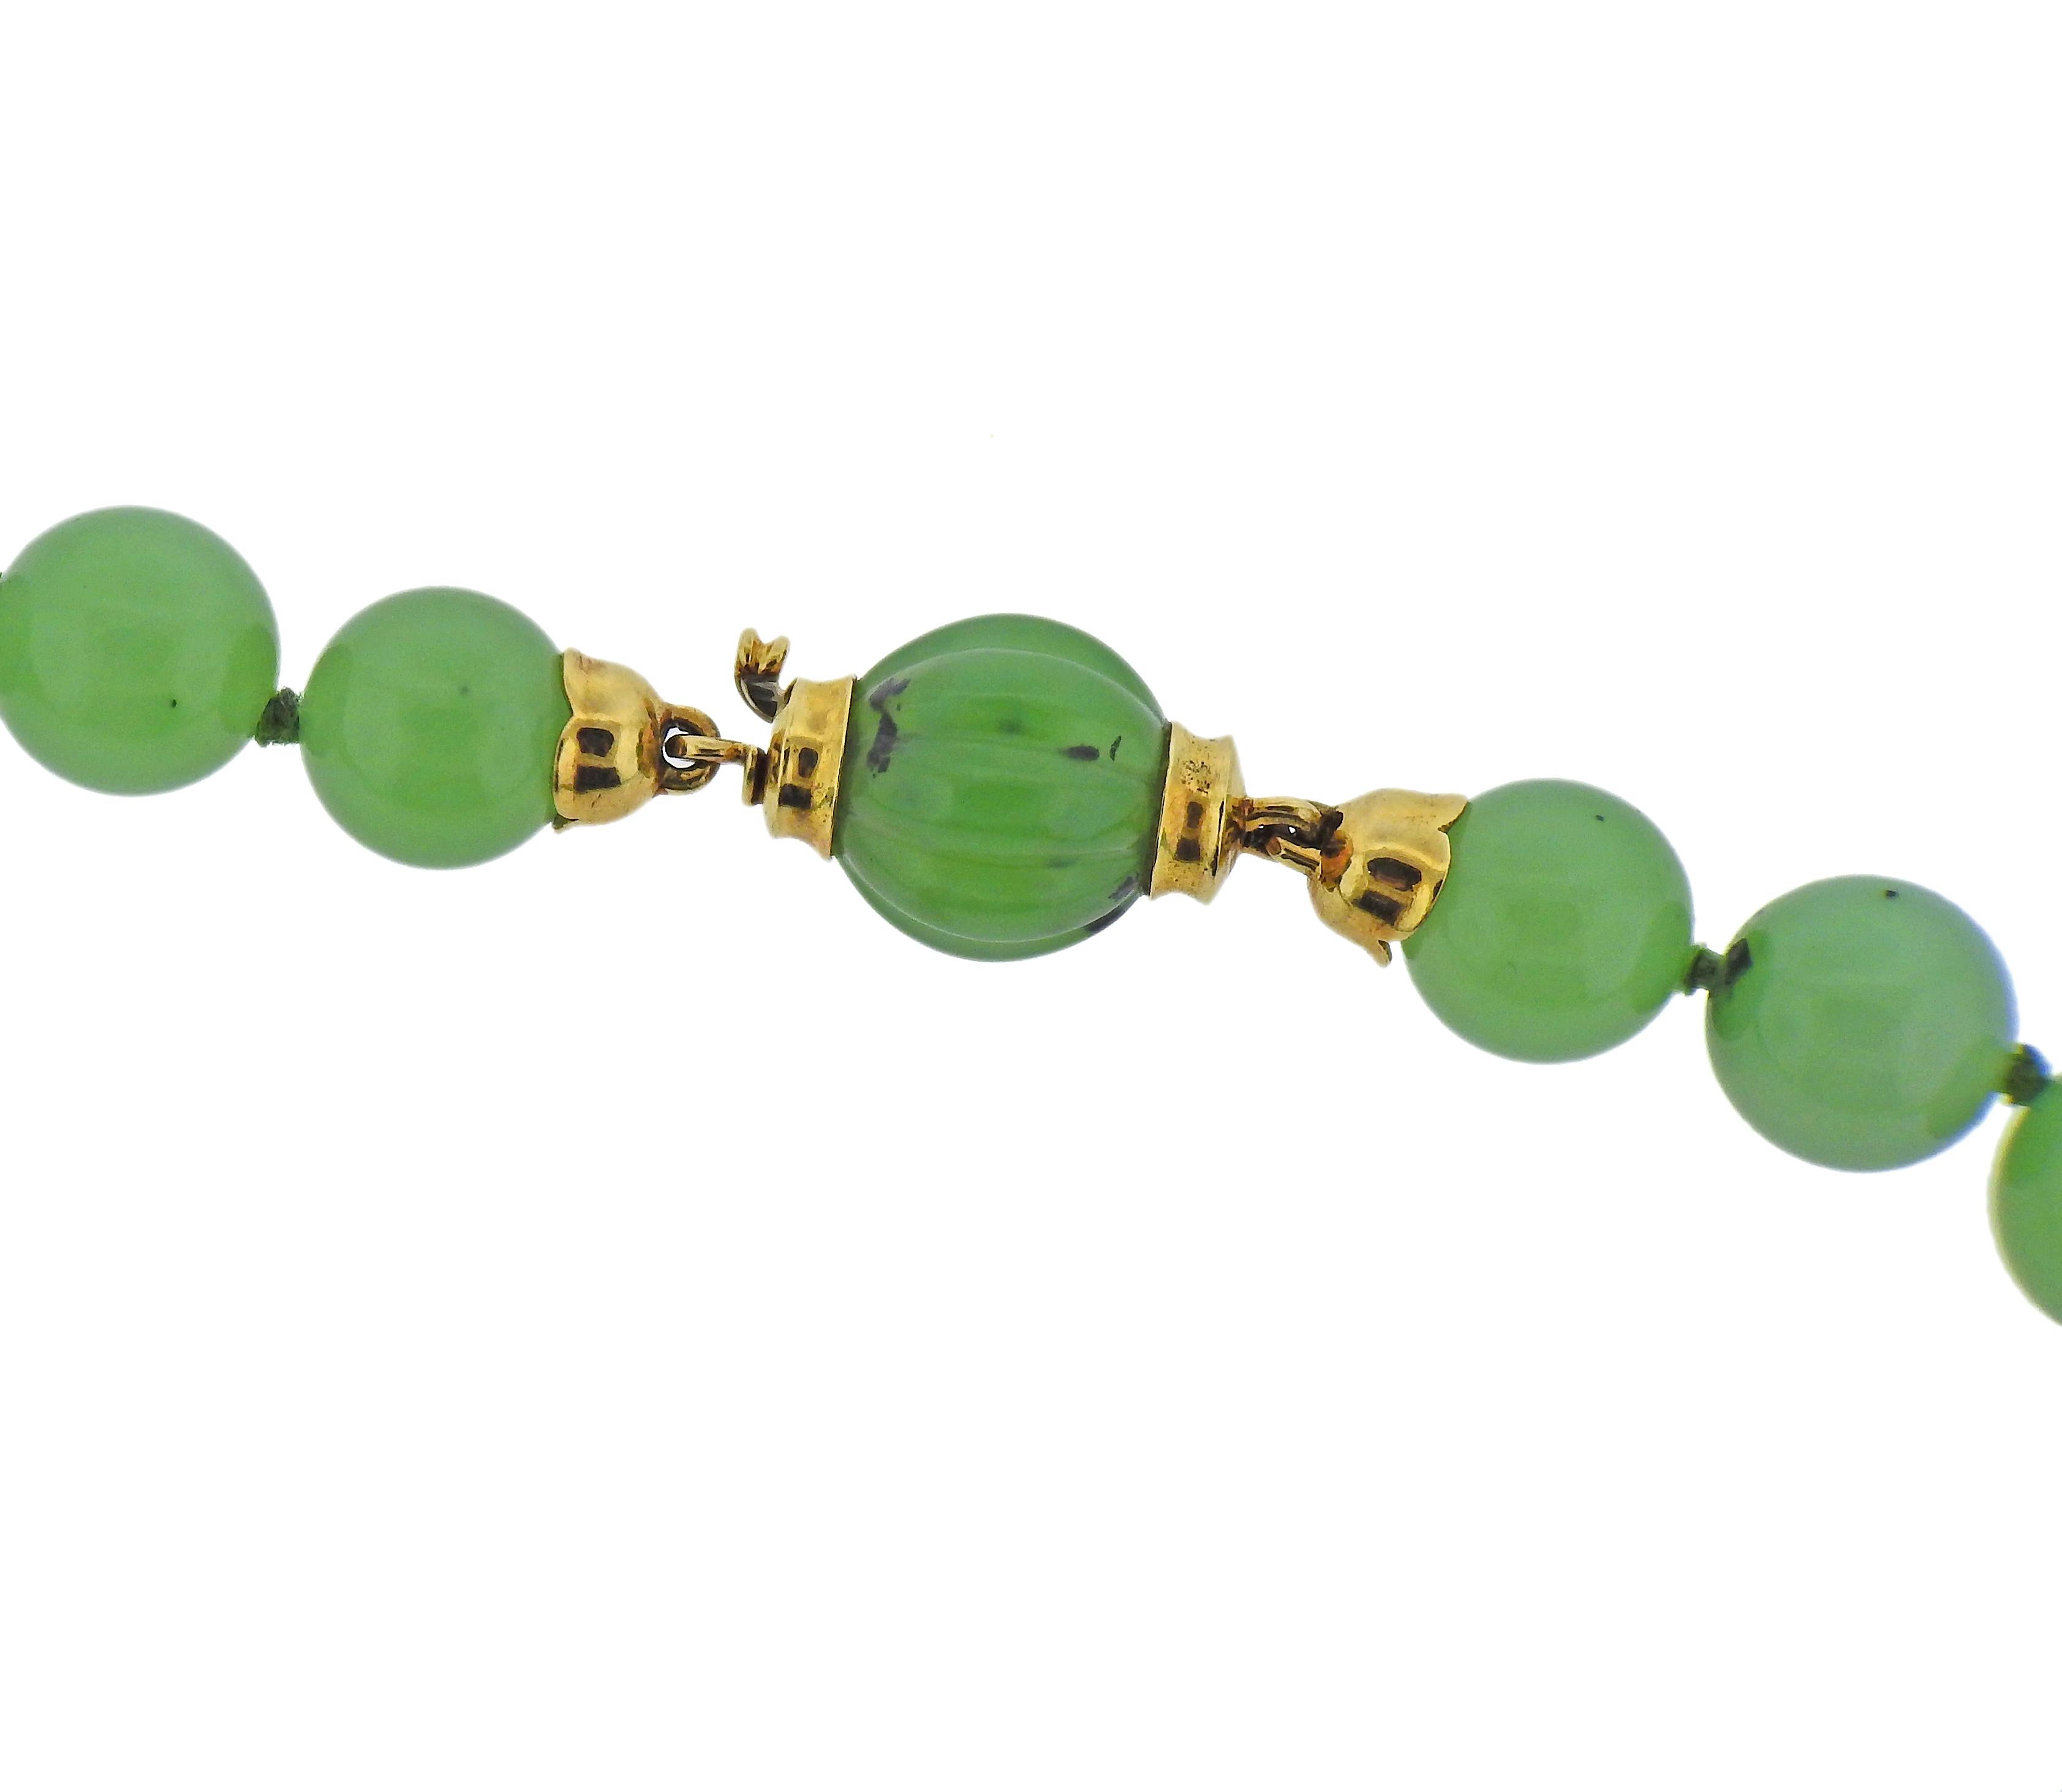 18k gold clasp necklace with 10.5-11mm jade beads. Necklace is 23